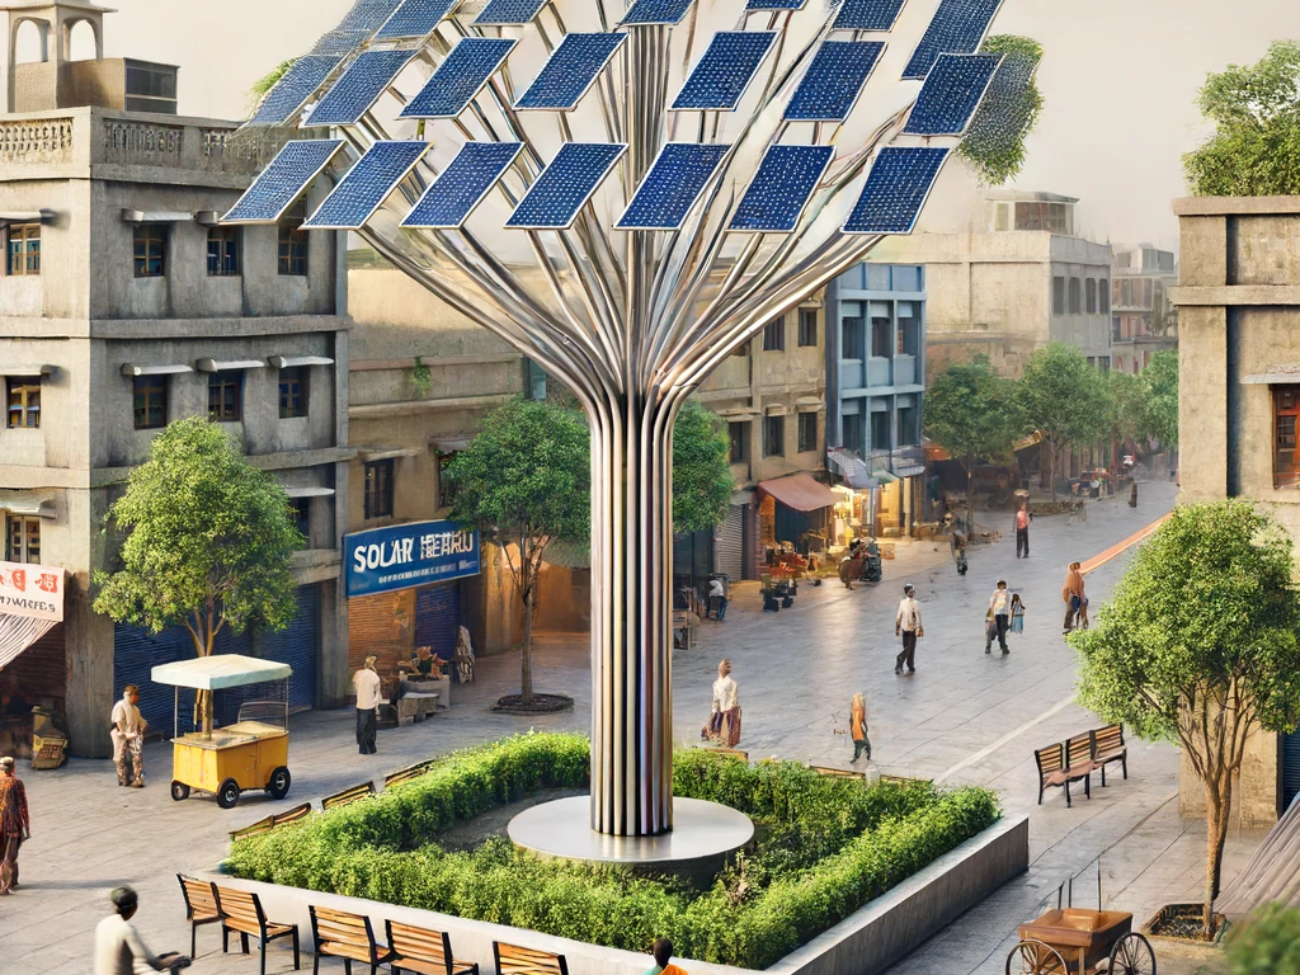 DALL·E 2024-06-13 11.51.02 - A realistic image of a solar tree installed in an Indian town. The solar tree has a central pole with branches supporting multiple solar panels, desig